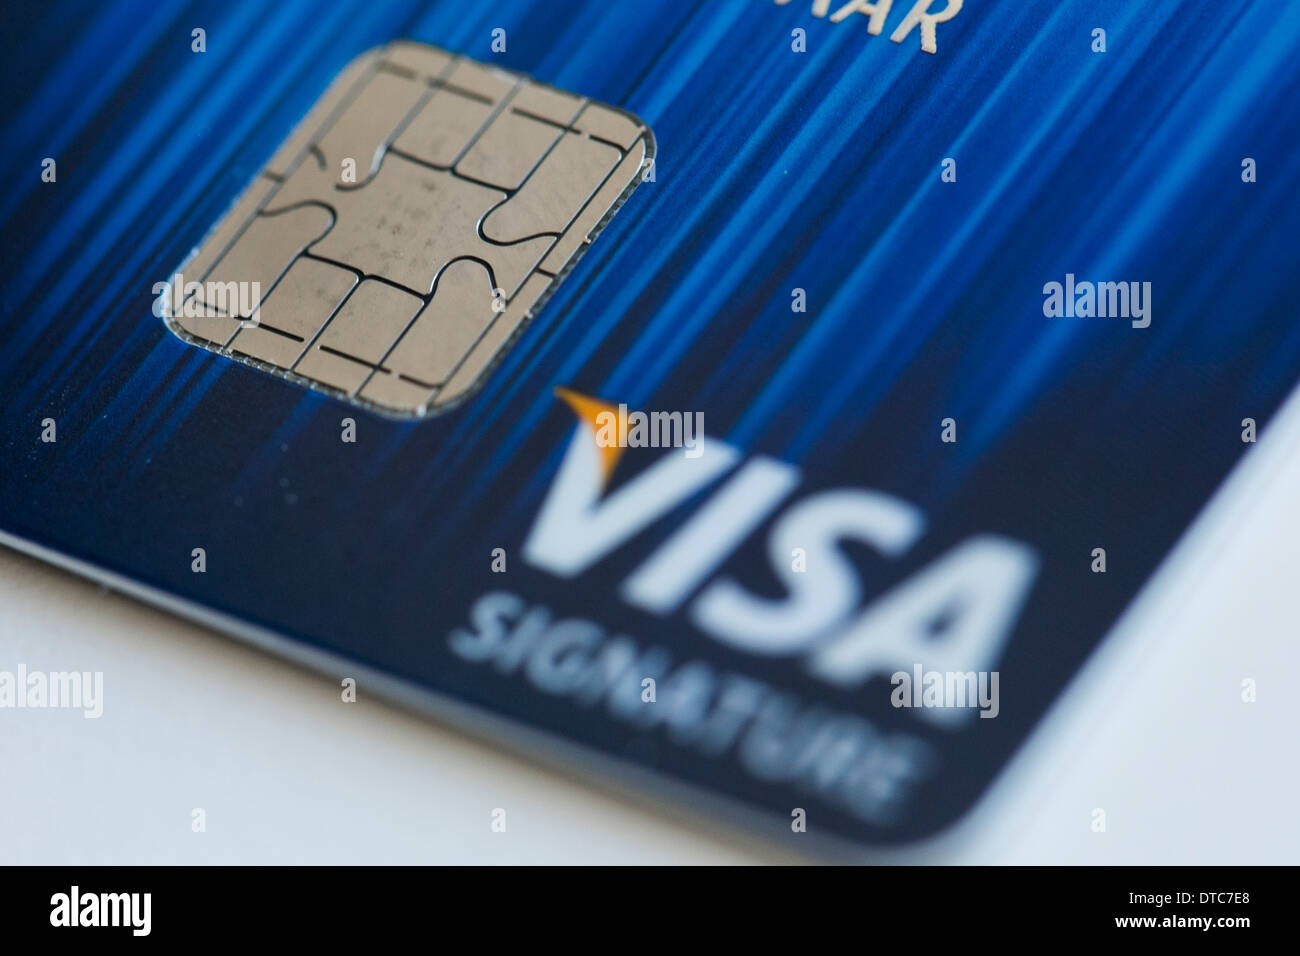 A Visa credit card featuring an EMV chip, also known as 'chip and PIN' juxtaposed with a magnetic strip card. Stock Photo